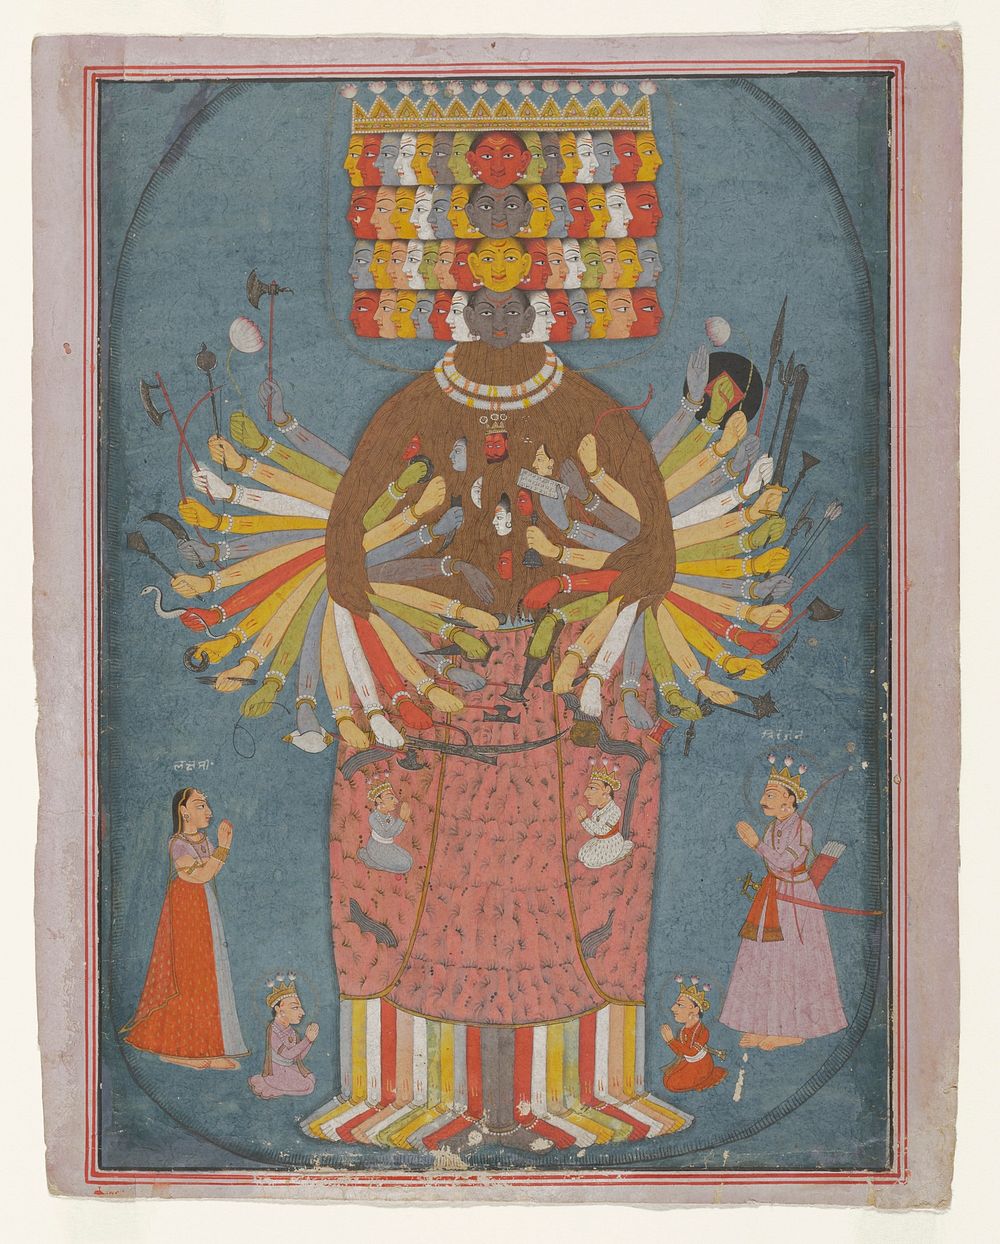 large standing figure with numerous colorful arms, legs and faces, and a bushy brown beard from which small faces emerge;…